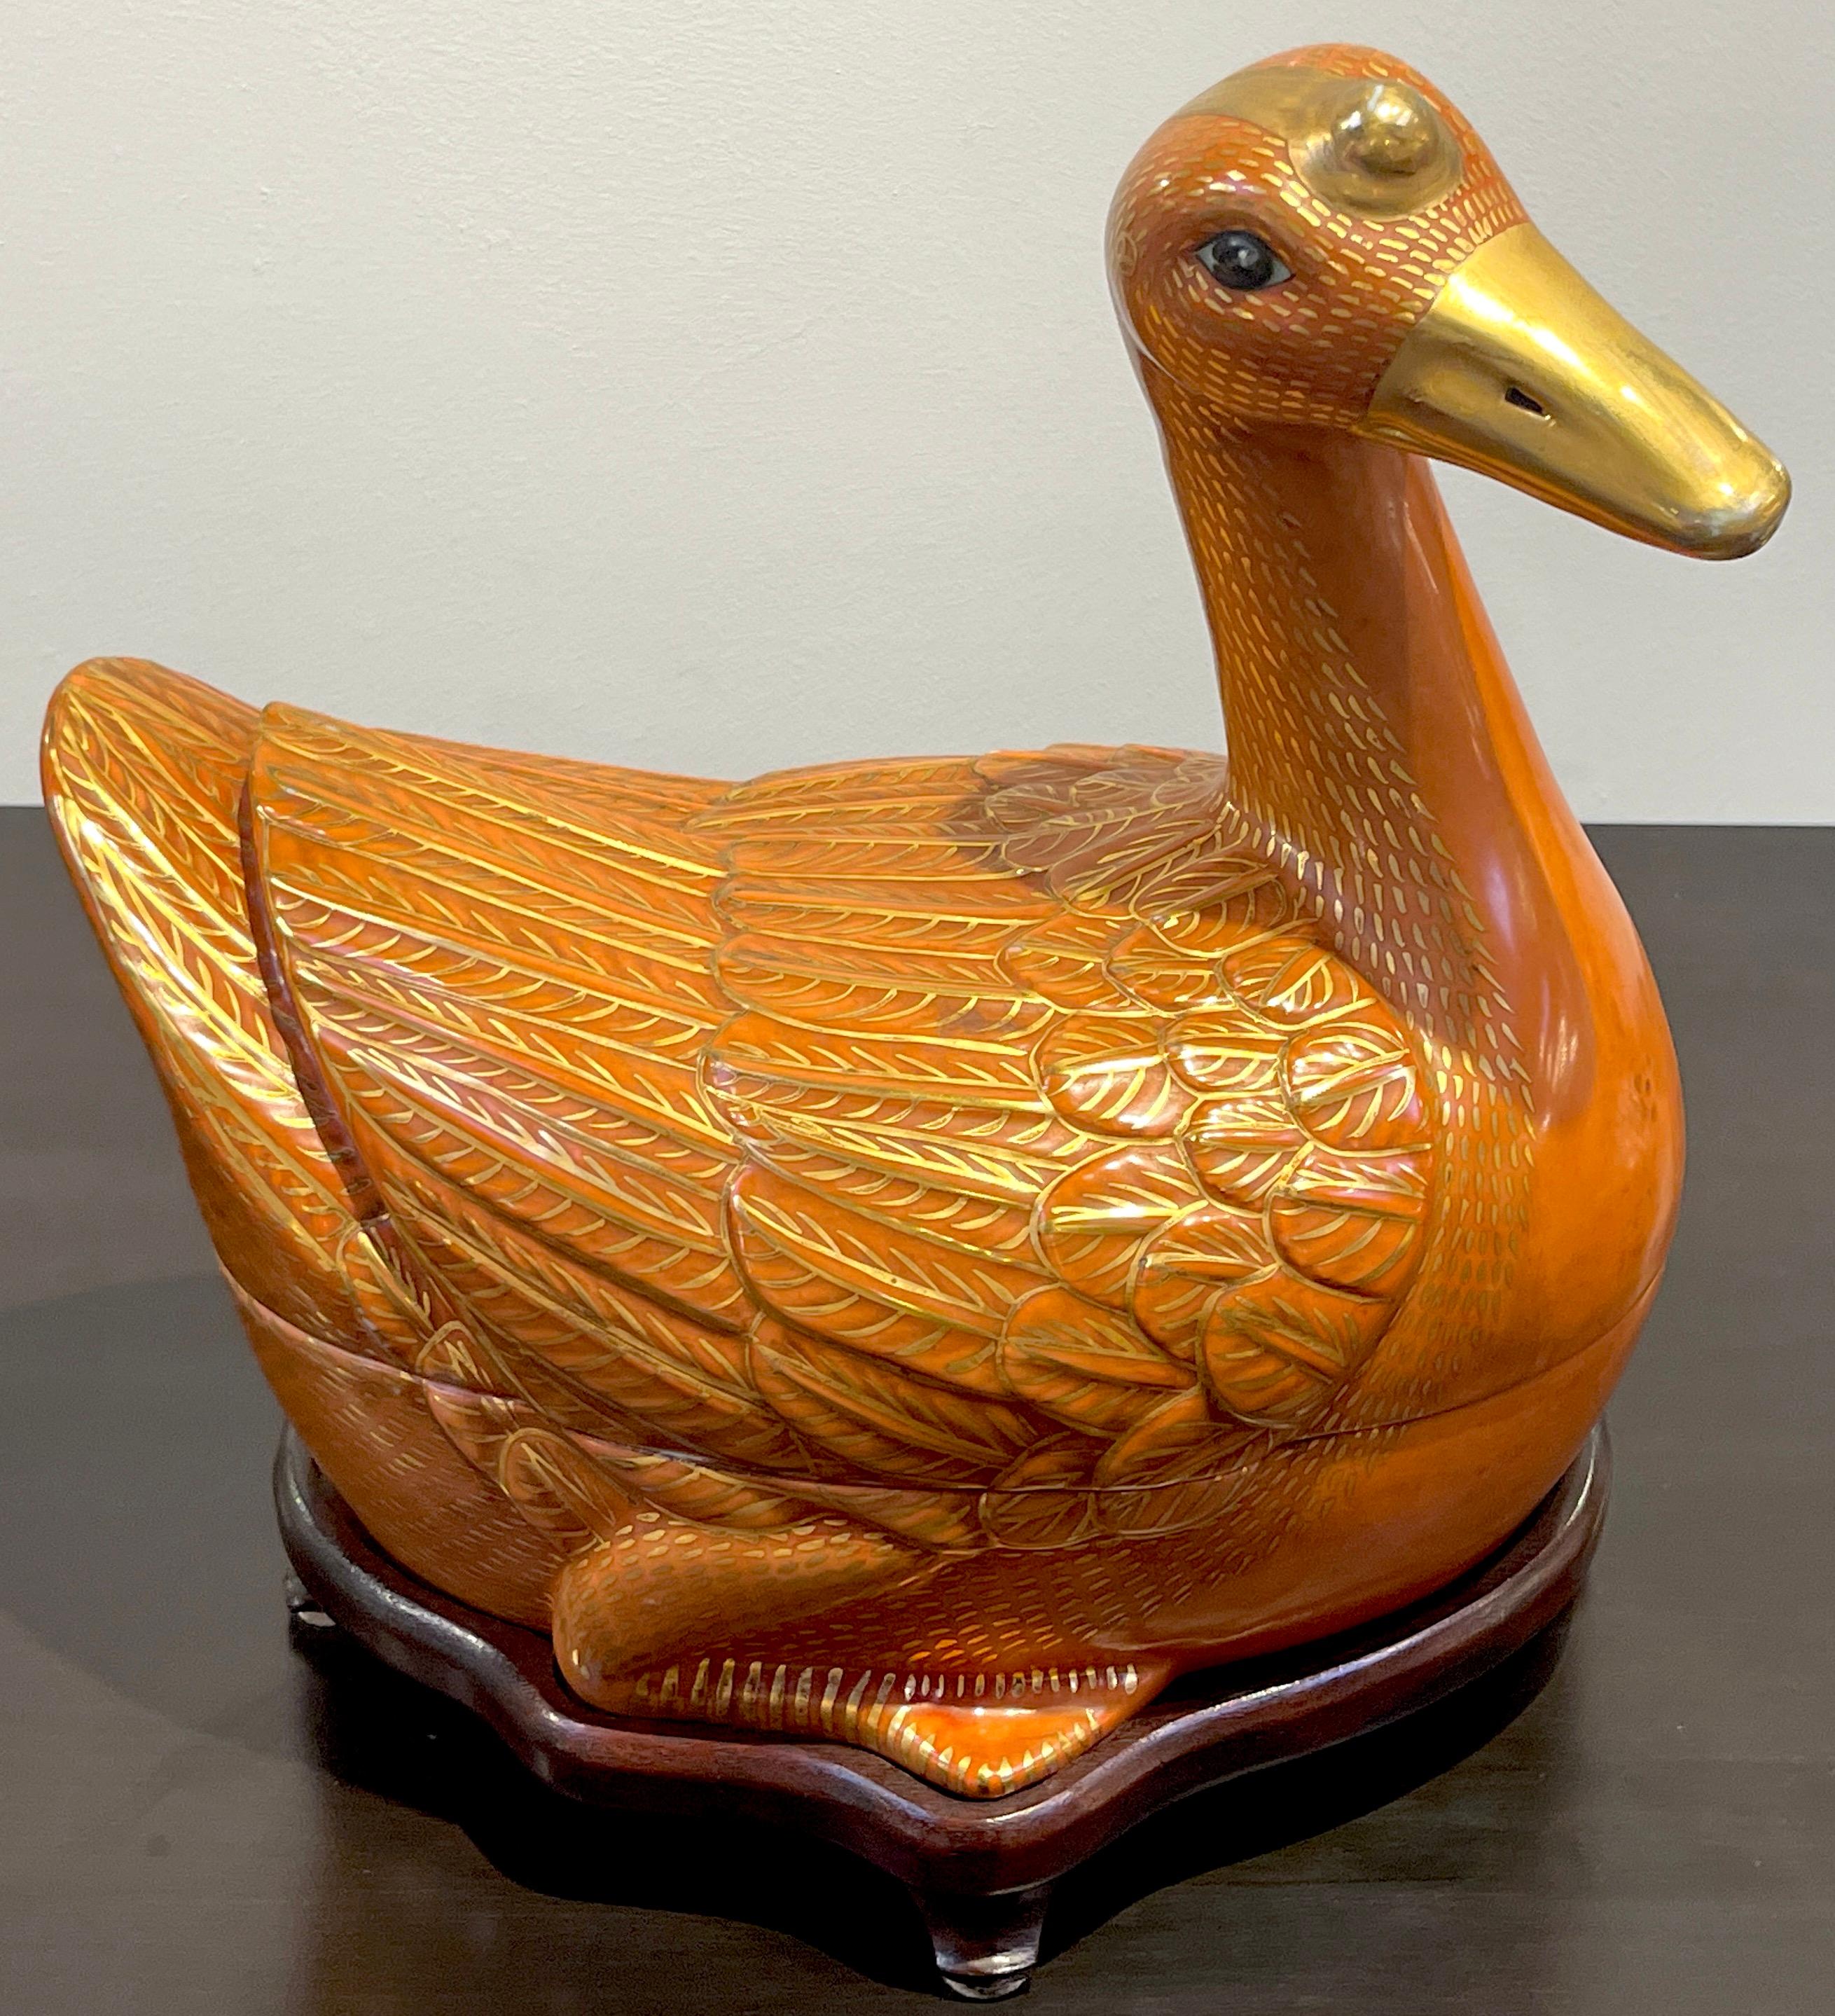 Chinese Export Porcelain figural iron red and gilt duck tureen & stand 
Later 20th century 
Of large size, realistically modeled and painted, the tureen in two parts, complete with a carved hard wood fitted stand.
The bottom bears a apocryphal